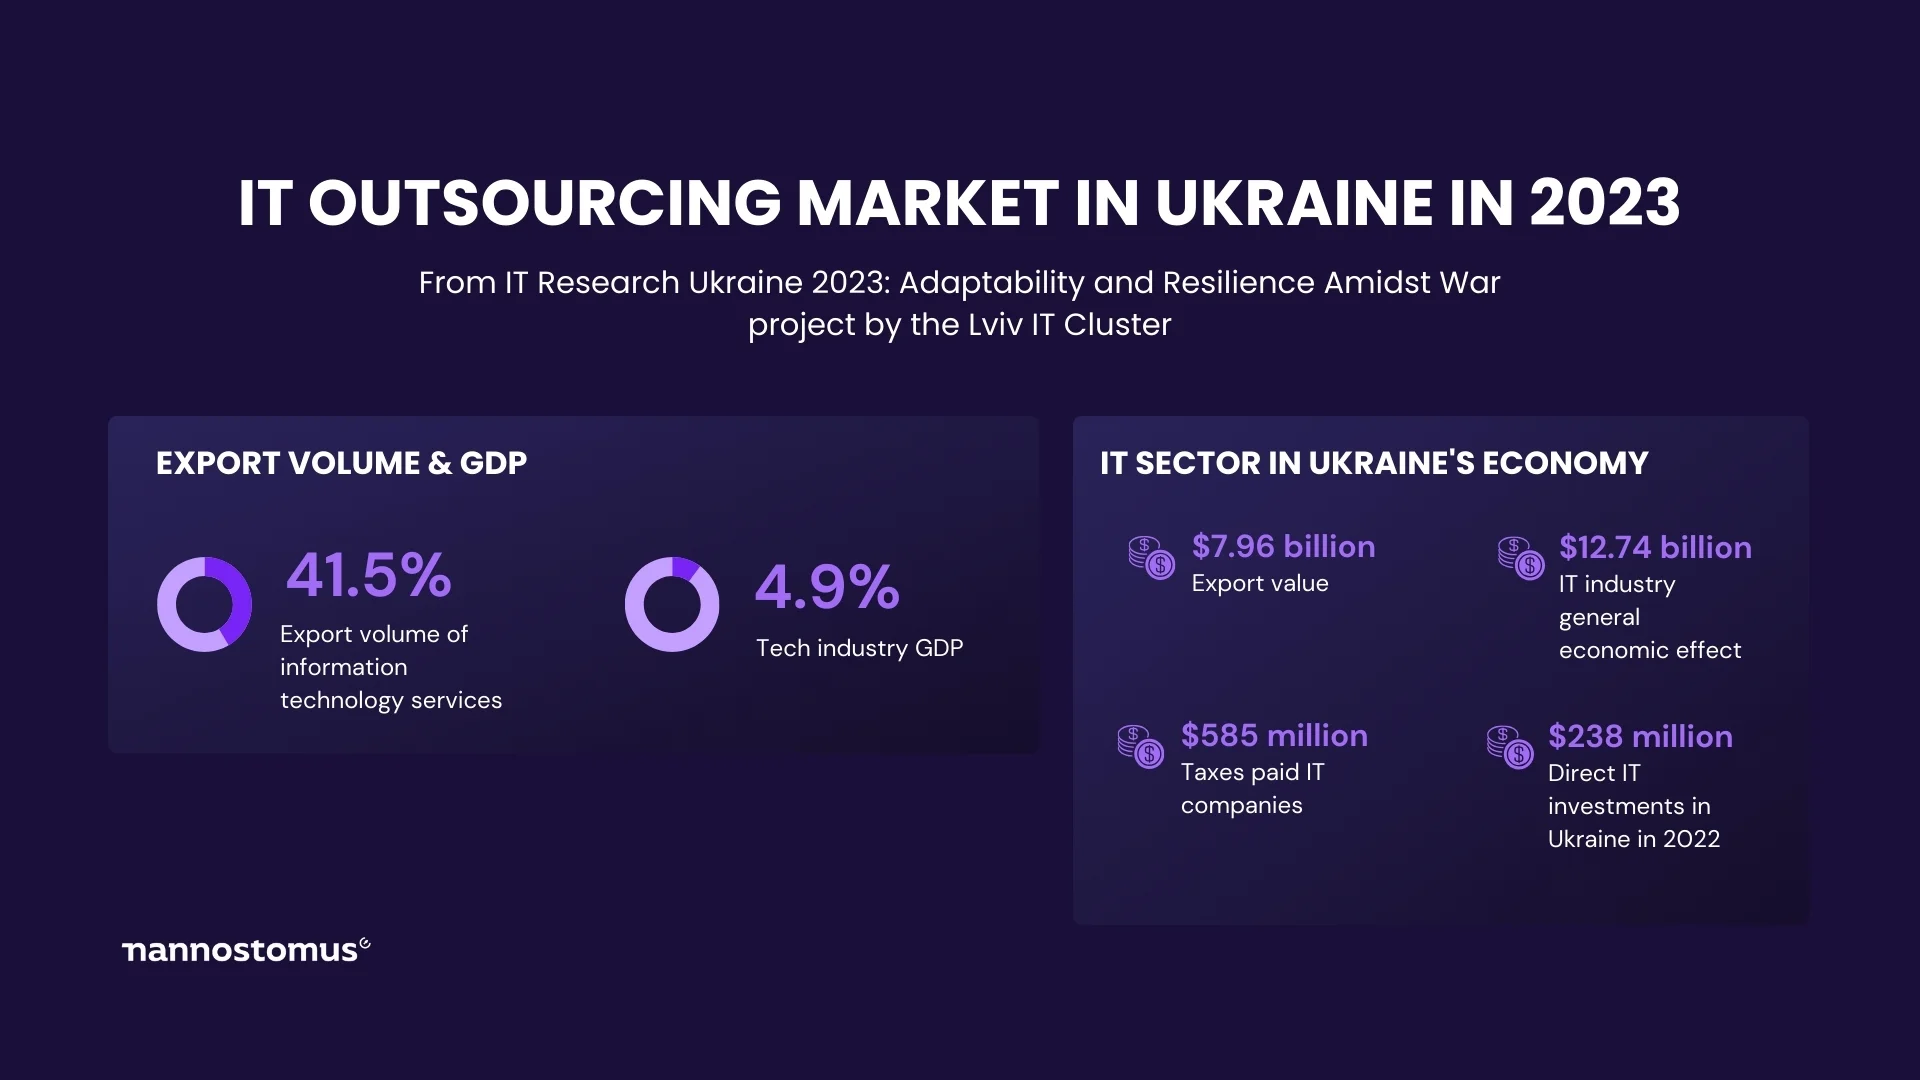 The size of the IT outsourcing market in Ukraine